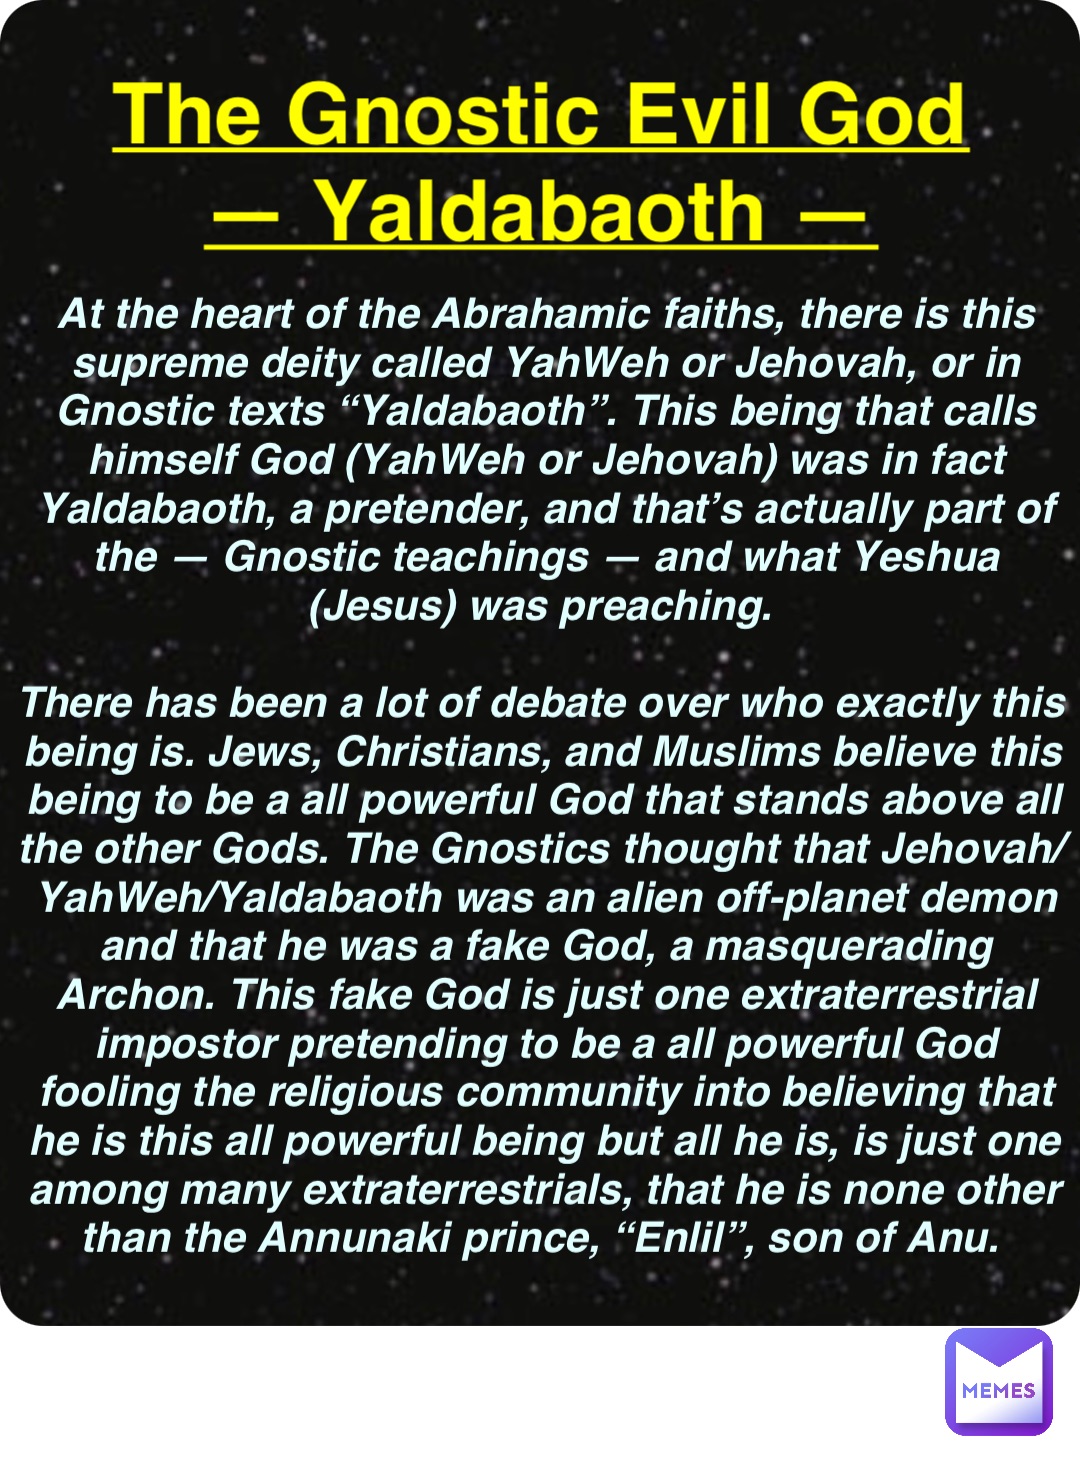 Double tap to edit The Gnostic Evil God
— Yaldabaoth — At the heart of the Abrahamic faiths, there is this supreme deity called YahWeh or Jehovah, or in Gnostic texts “Yaldabaoth”. This being that calls himself God (YahWeh or Jehovah) was in fact Yaldabaoth, a pretender, and that’s actually part of the — Gnostic teachings — and what Yeshua (Jesus) was preaching.

There has been a lot of debate over who exactly this being is. Jews, Christians, and Muslims believe this being to be a all powerful God that stands above all the other Gods. The Gnostics thought that Jehovah/YahWeh/Yaldabaoth was an alien off-planet demon and that he was a fake God, a masquerading Archon. This fake God is just one extraterrestrial impostor pretending to be a all powerful God fooling the religious community into believing that he is this all powerful being but all he is, is just one among many extraterrestrials, that he is none other than the Annunaki prince, “Enlil”, son of Anu.